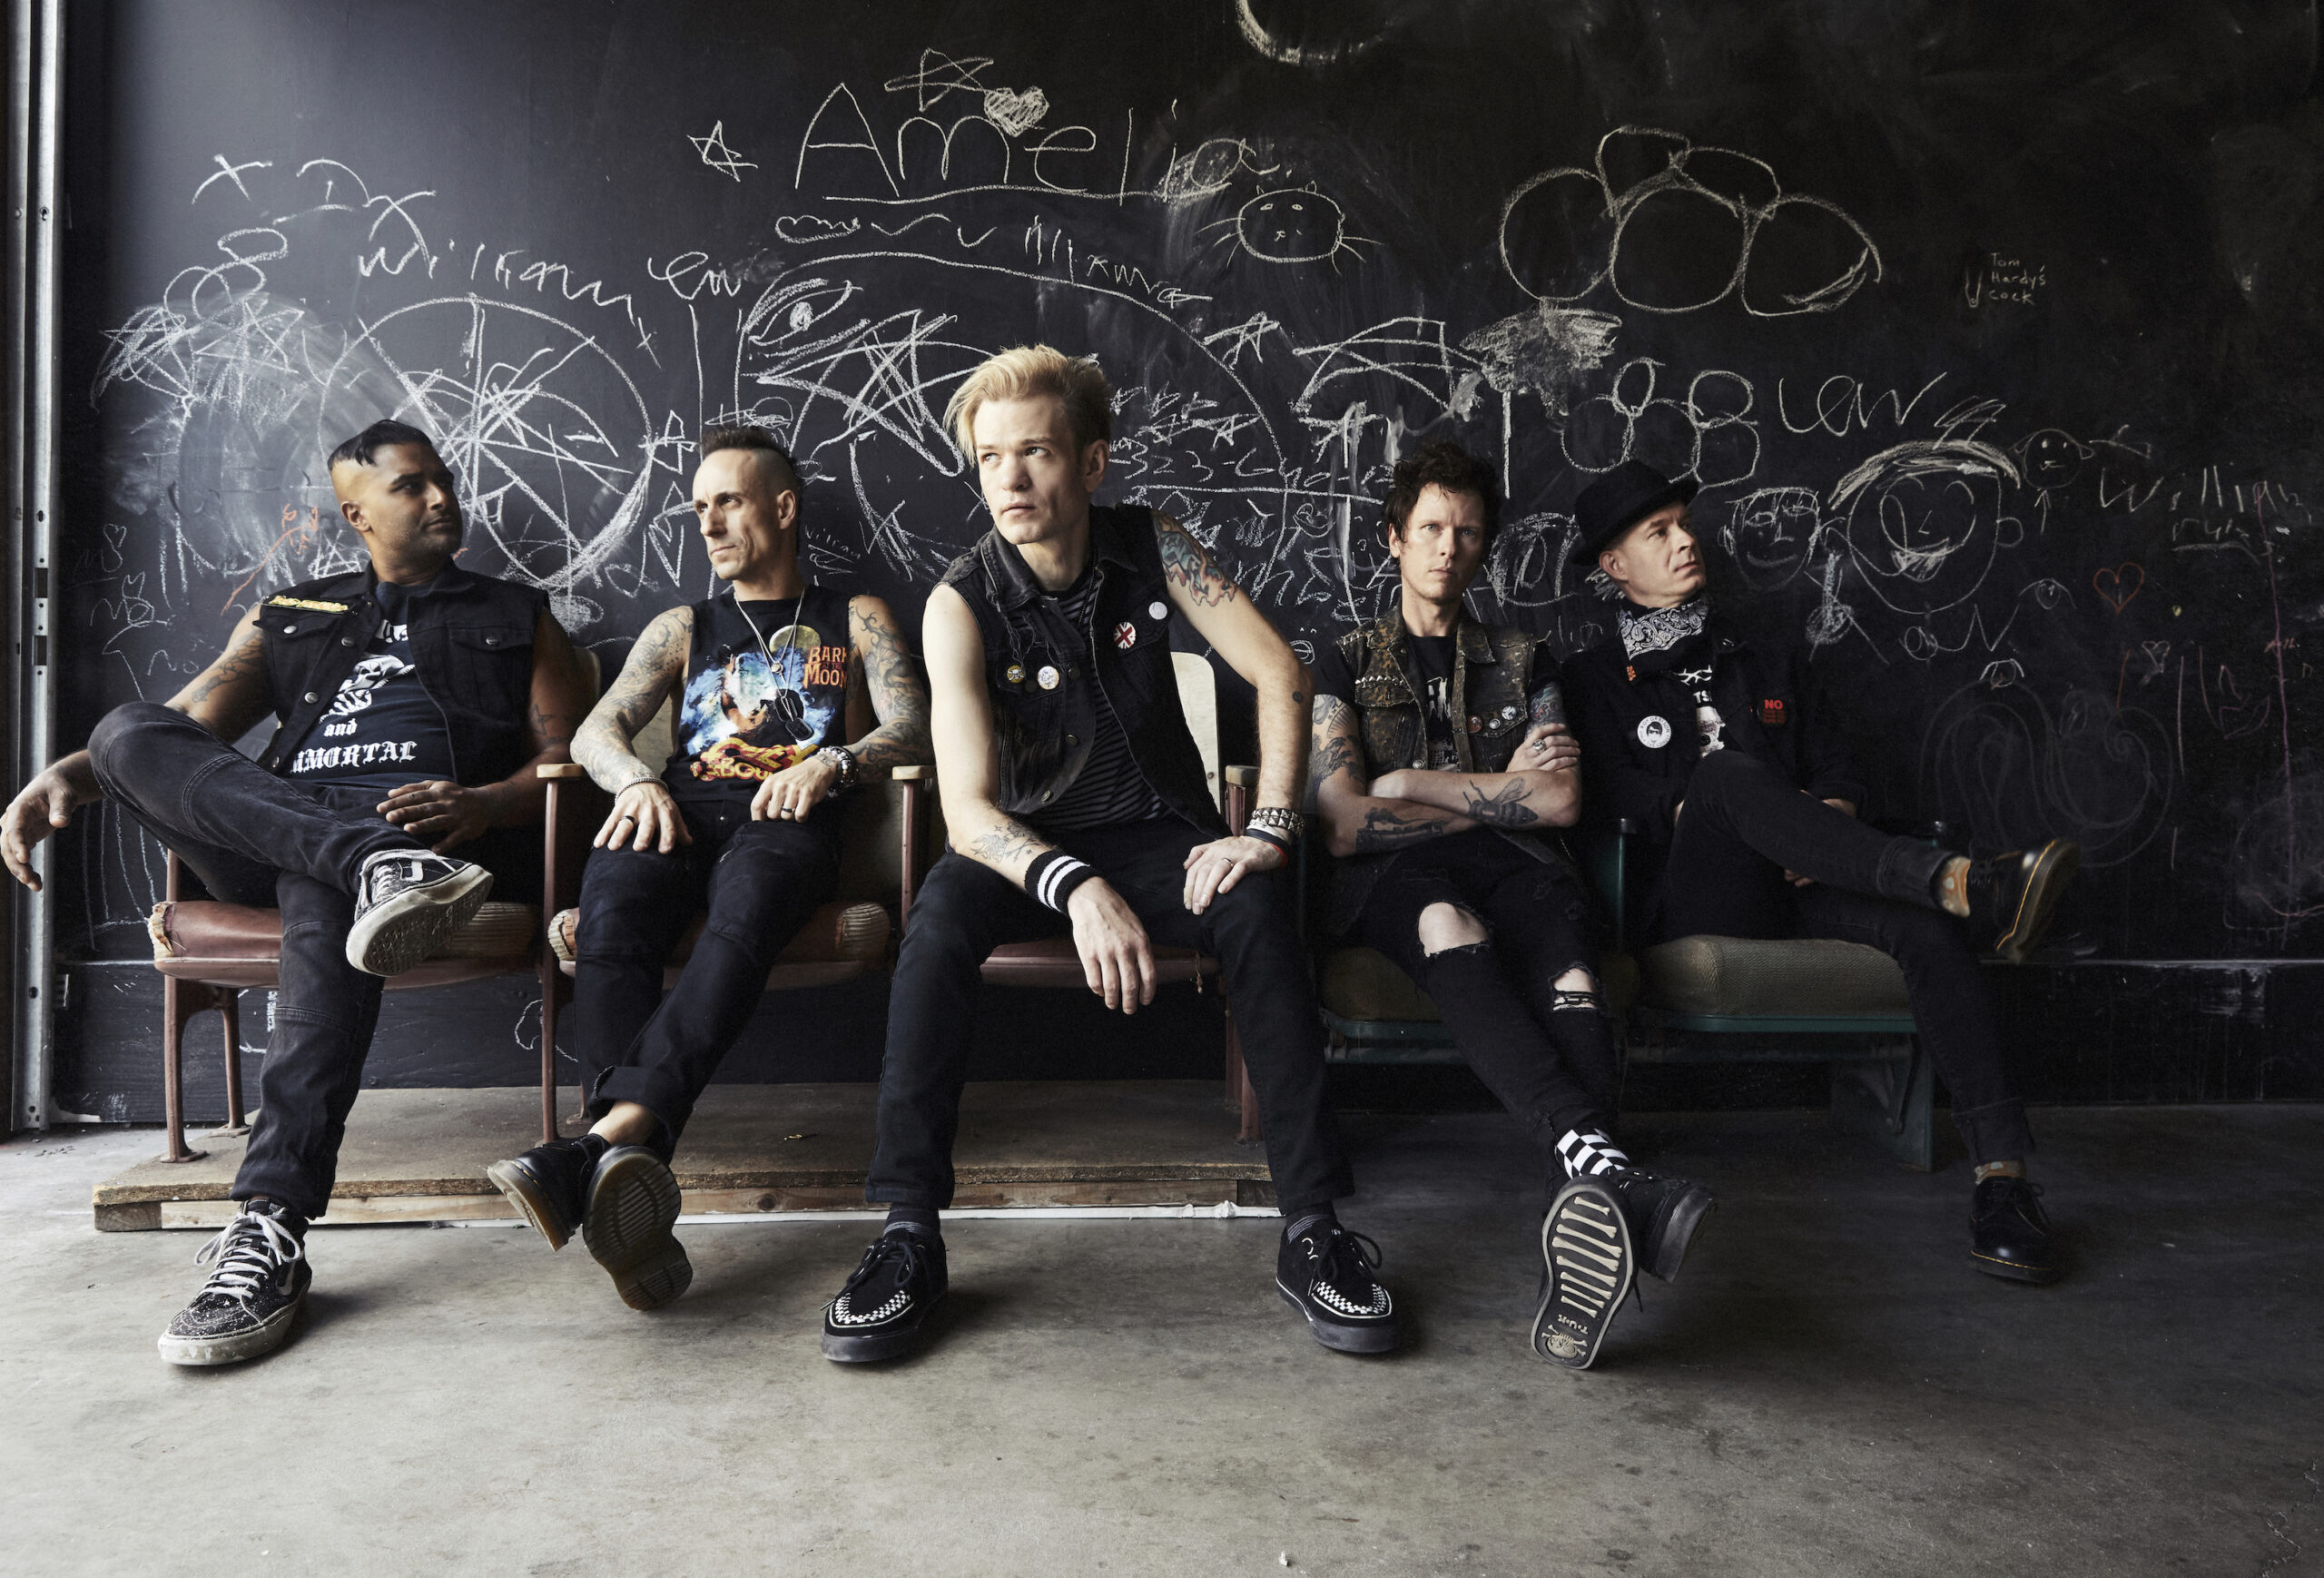 Sum 41's Deryck Whibley Has Gone Through <i>Heaven and Hell</i> to Get to Sobriety